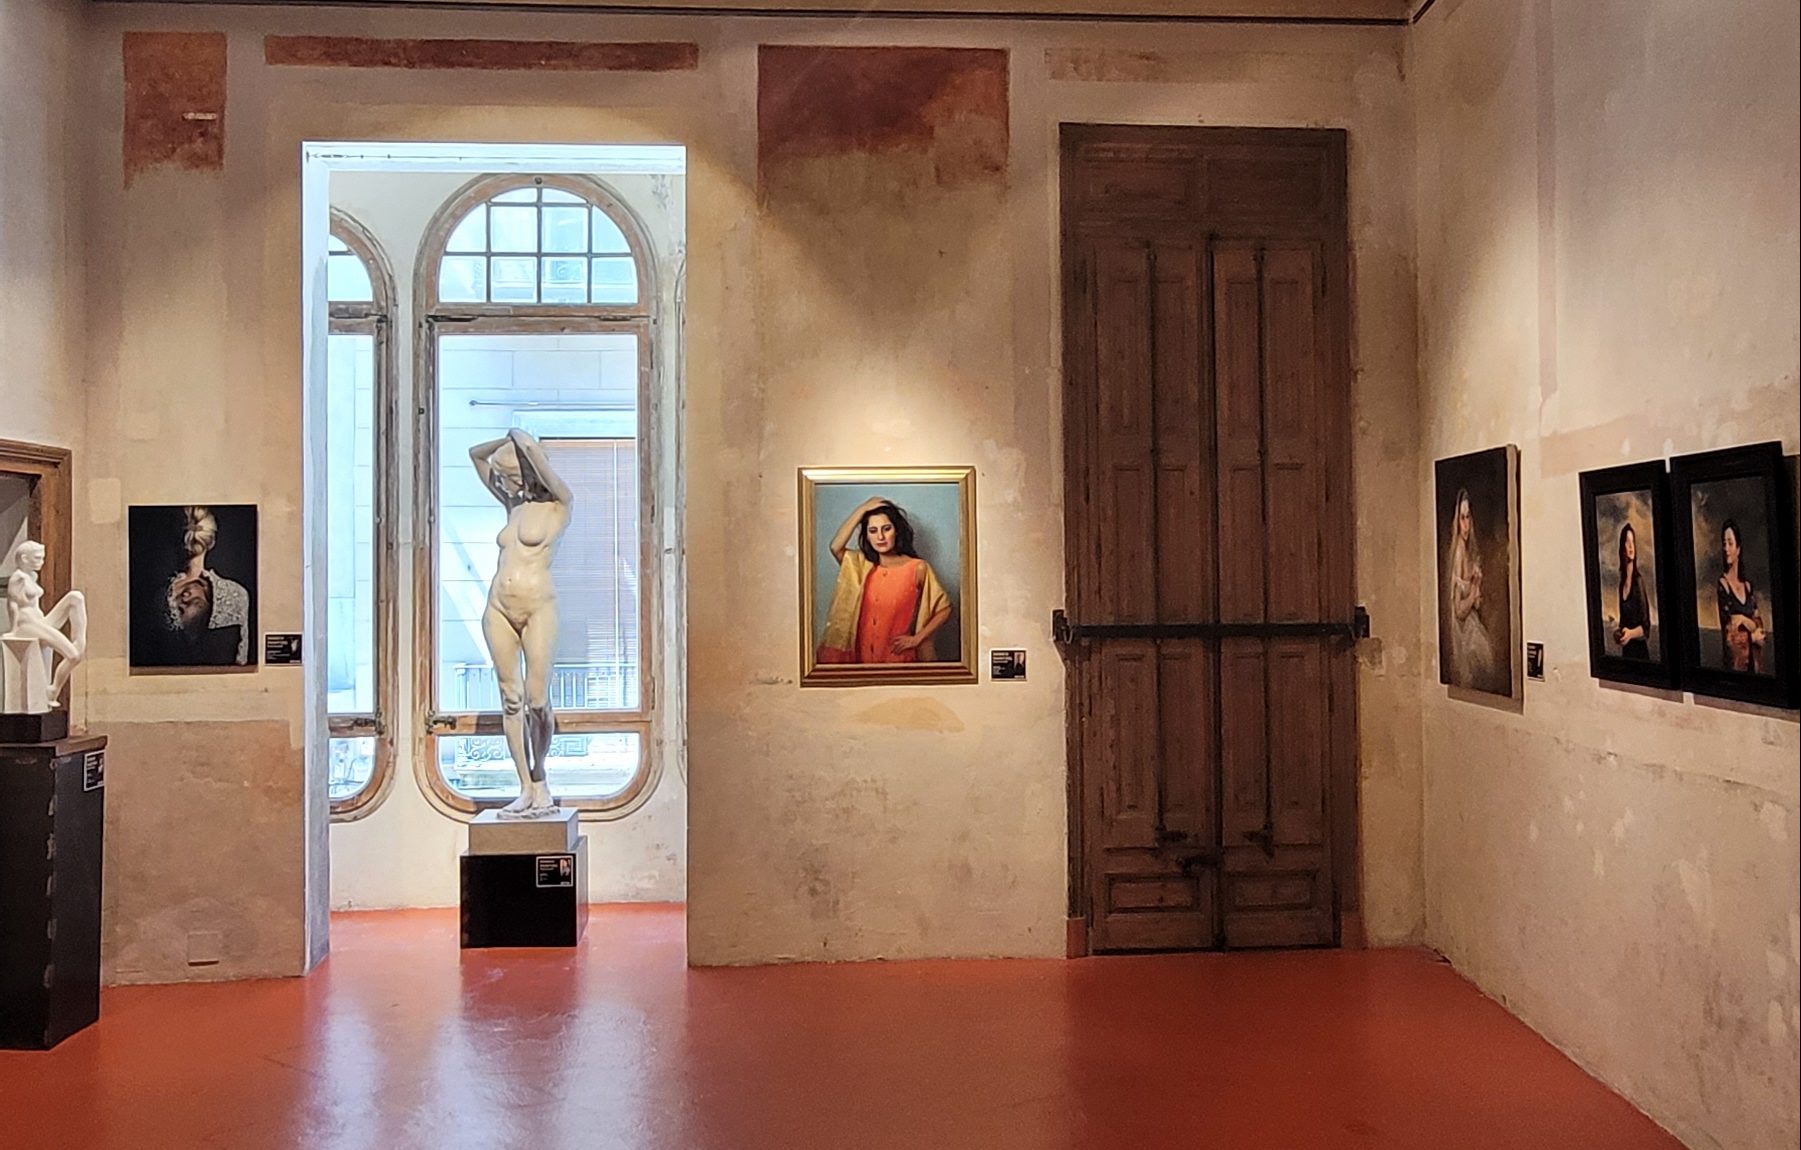 Installation view of paintings and sculptures with figures.